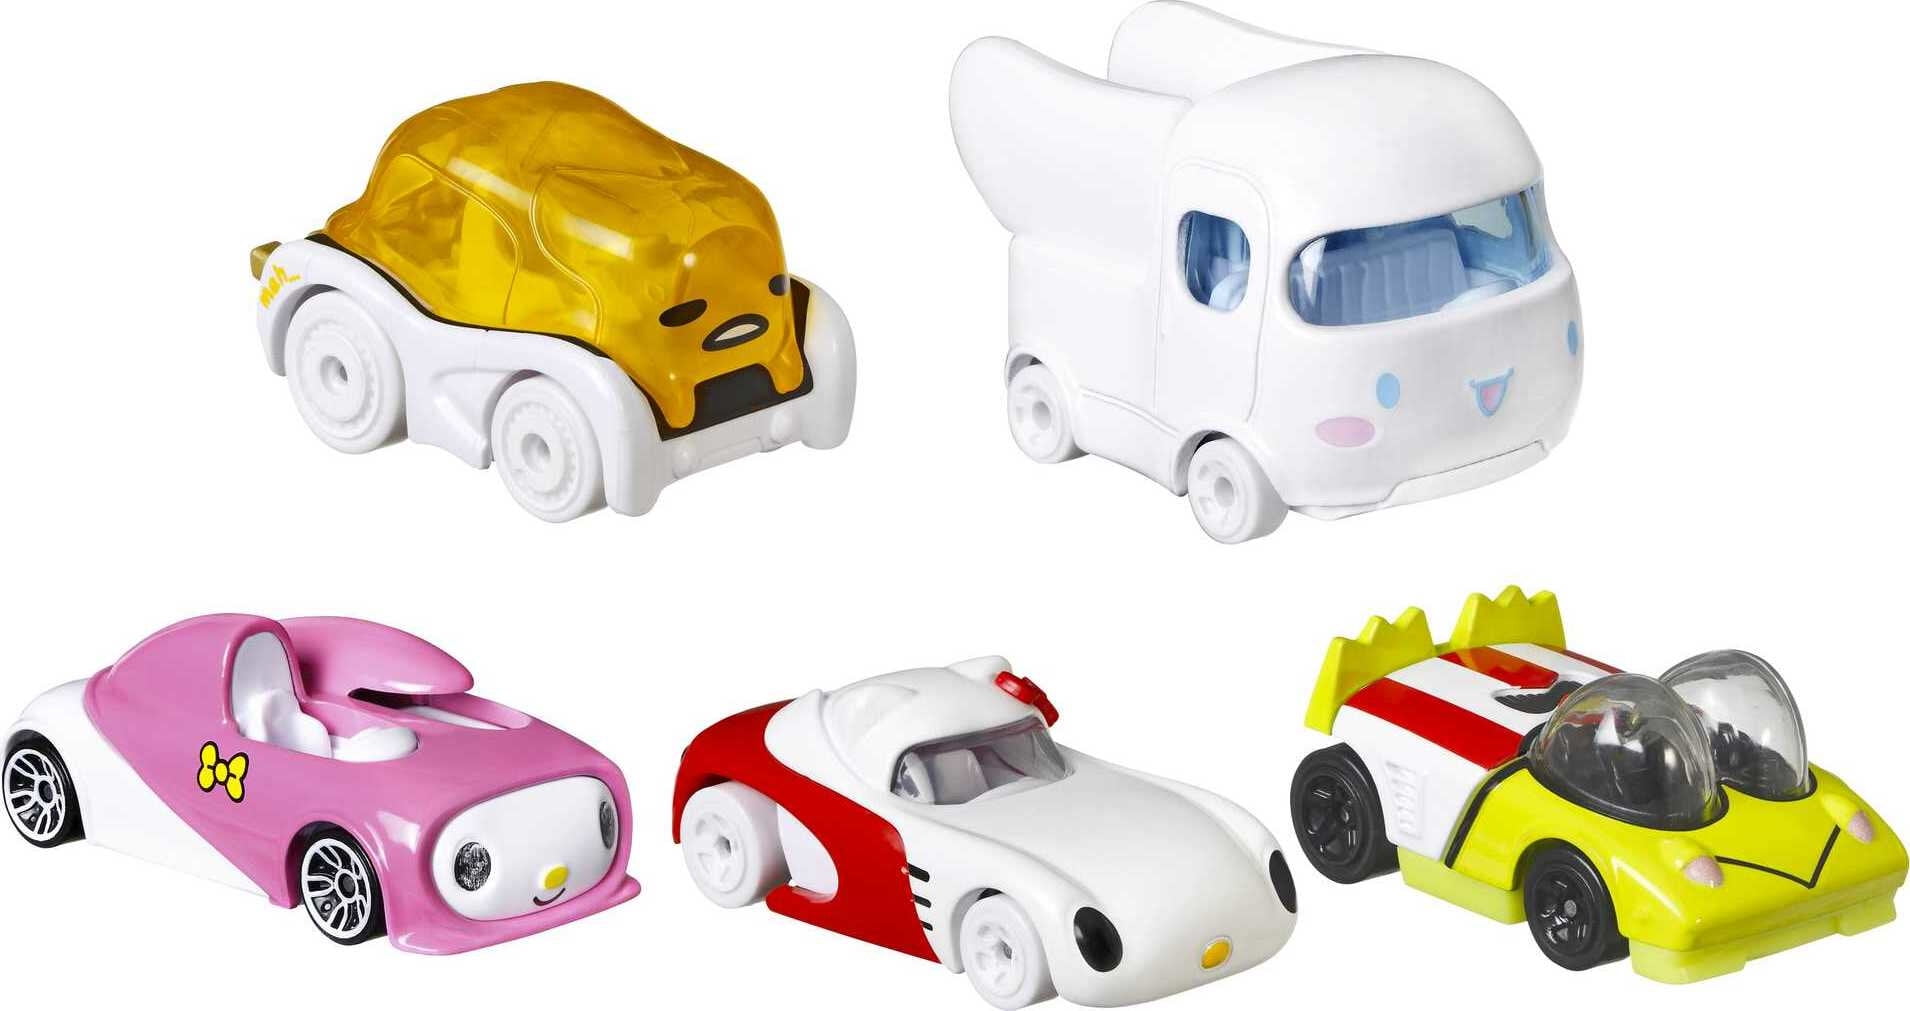 Hot Wheels Sanrio Set of 5 Character Toy Cars, Collectible Vehicles  Including Hello Kitty